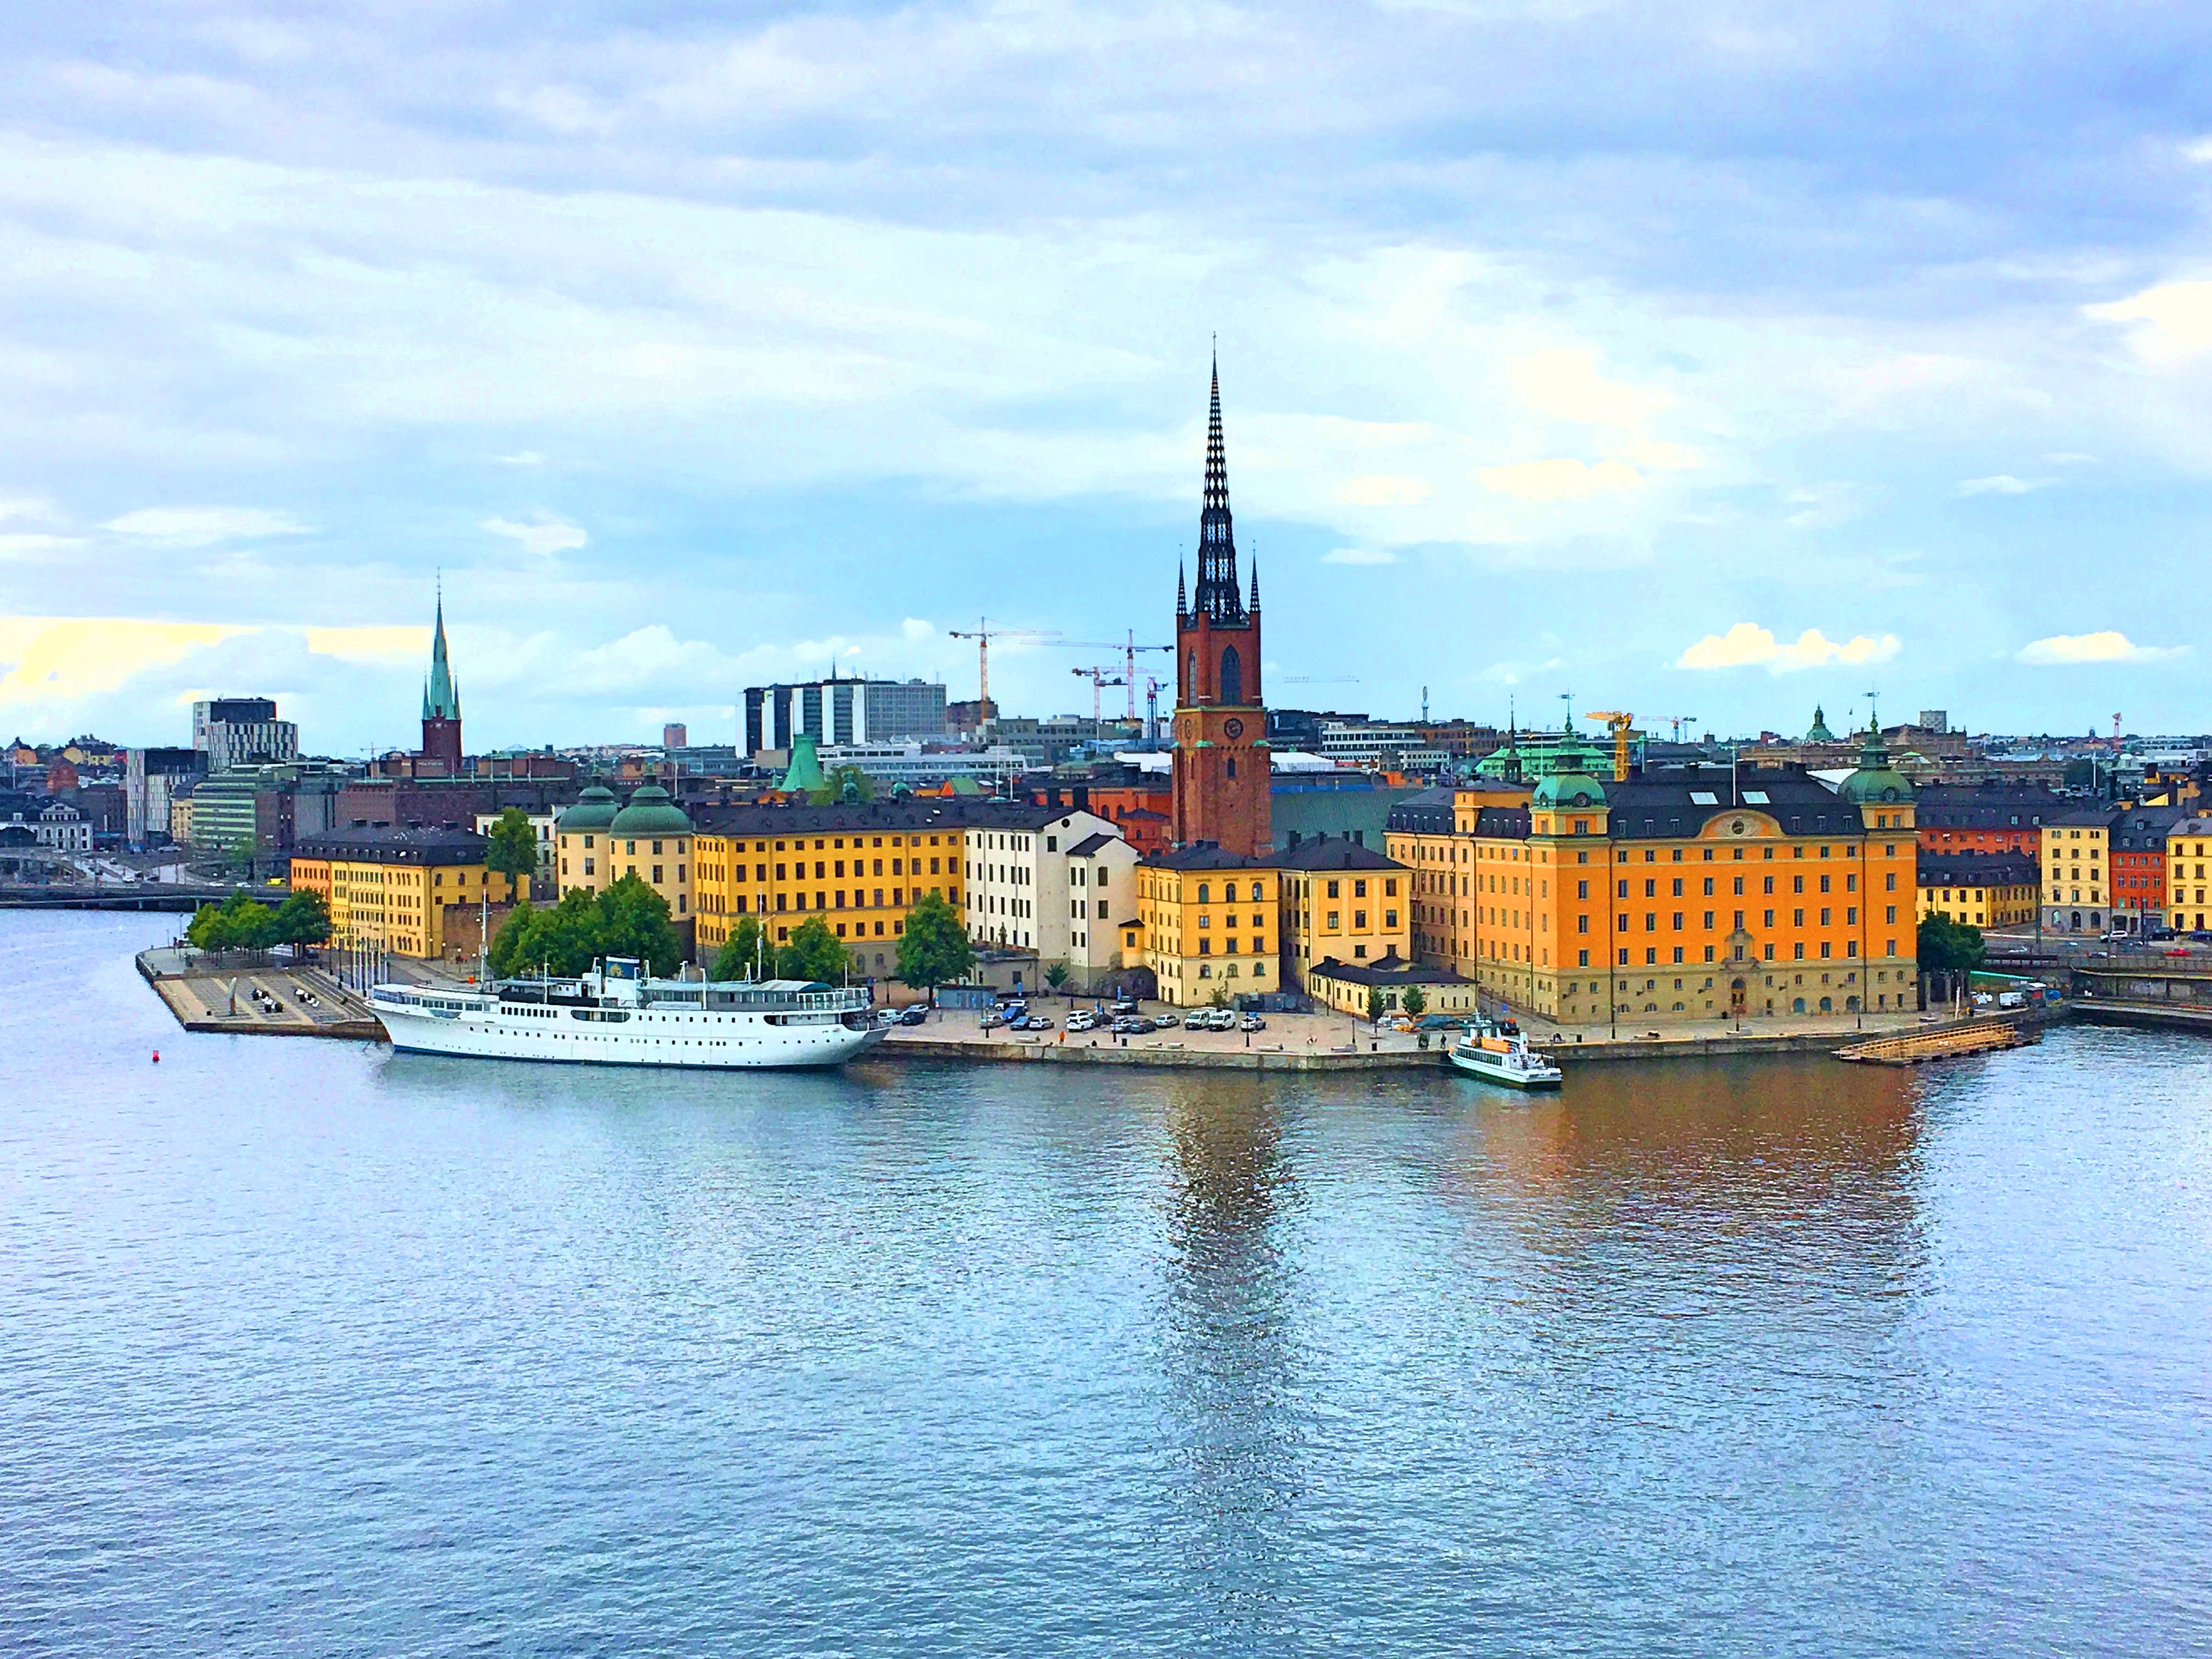 Štokholm mesto3 - Stockholm-What to visit in a city dubbed Venice of the North